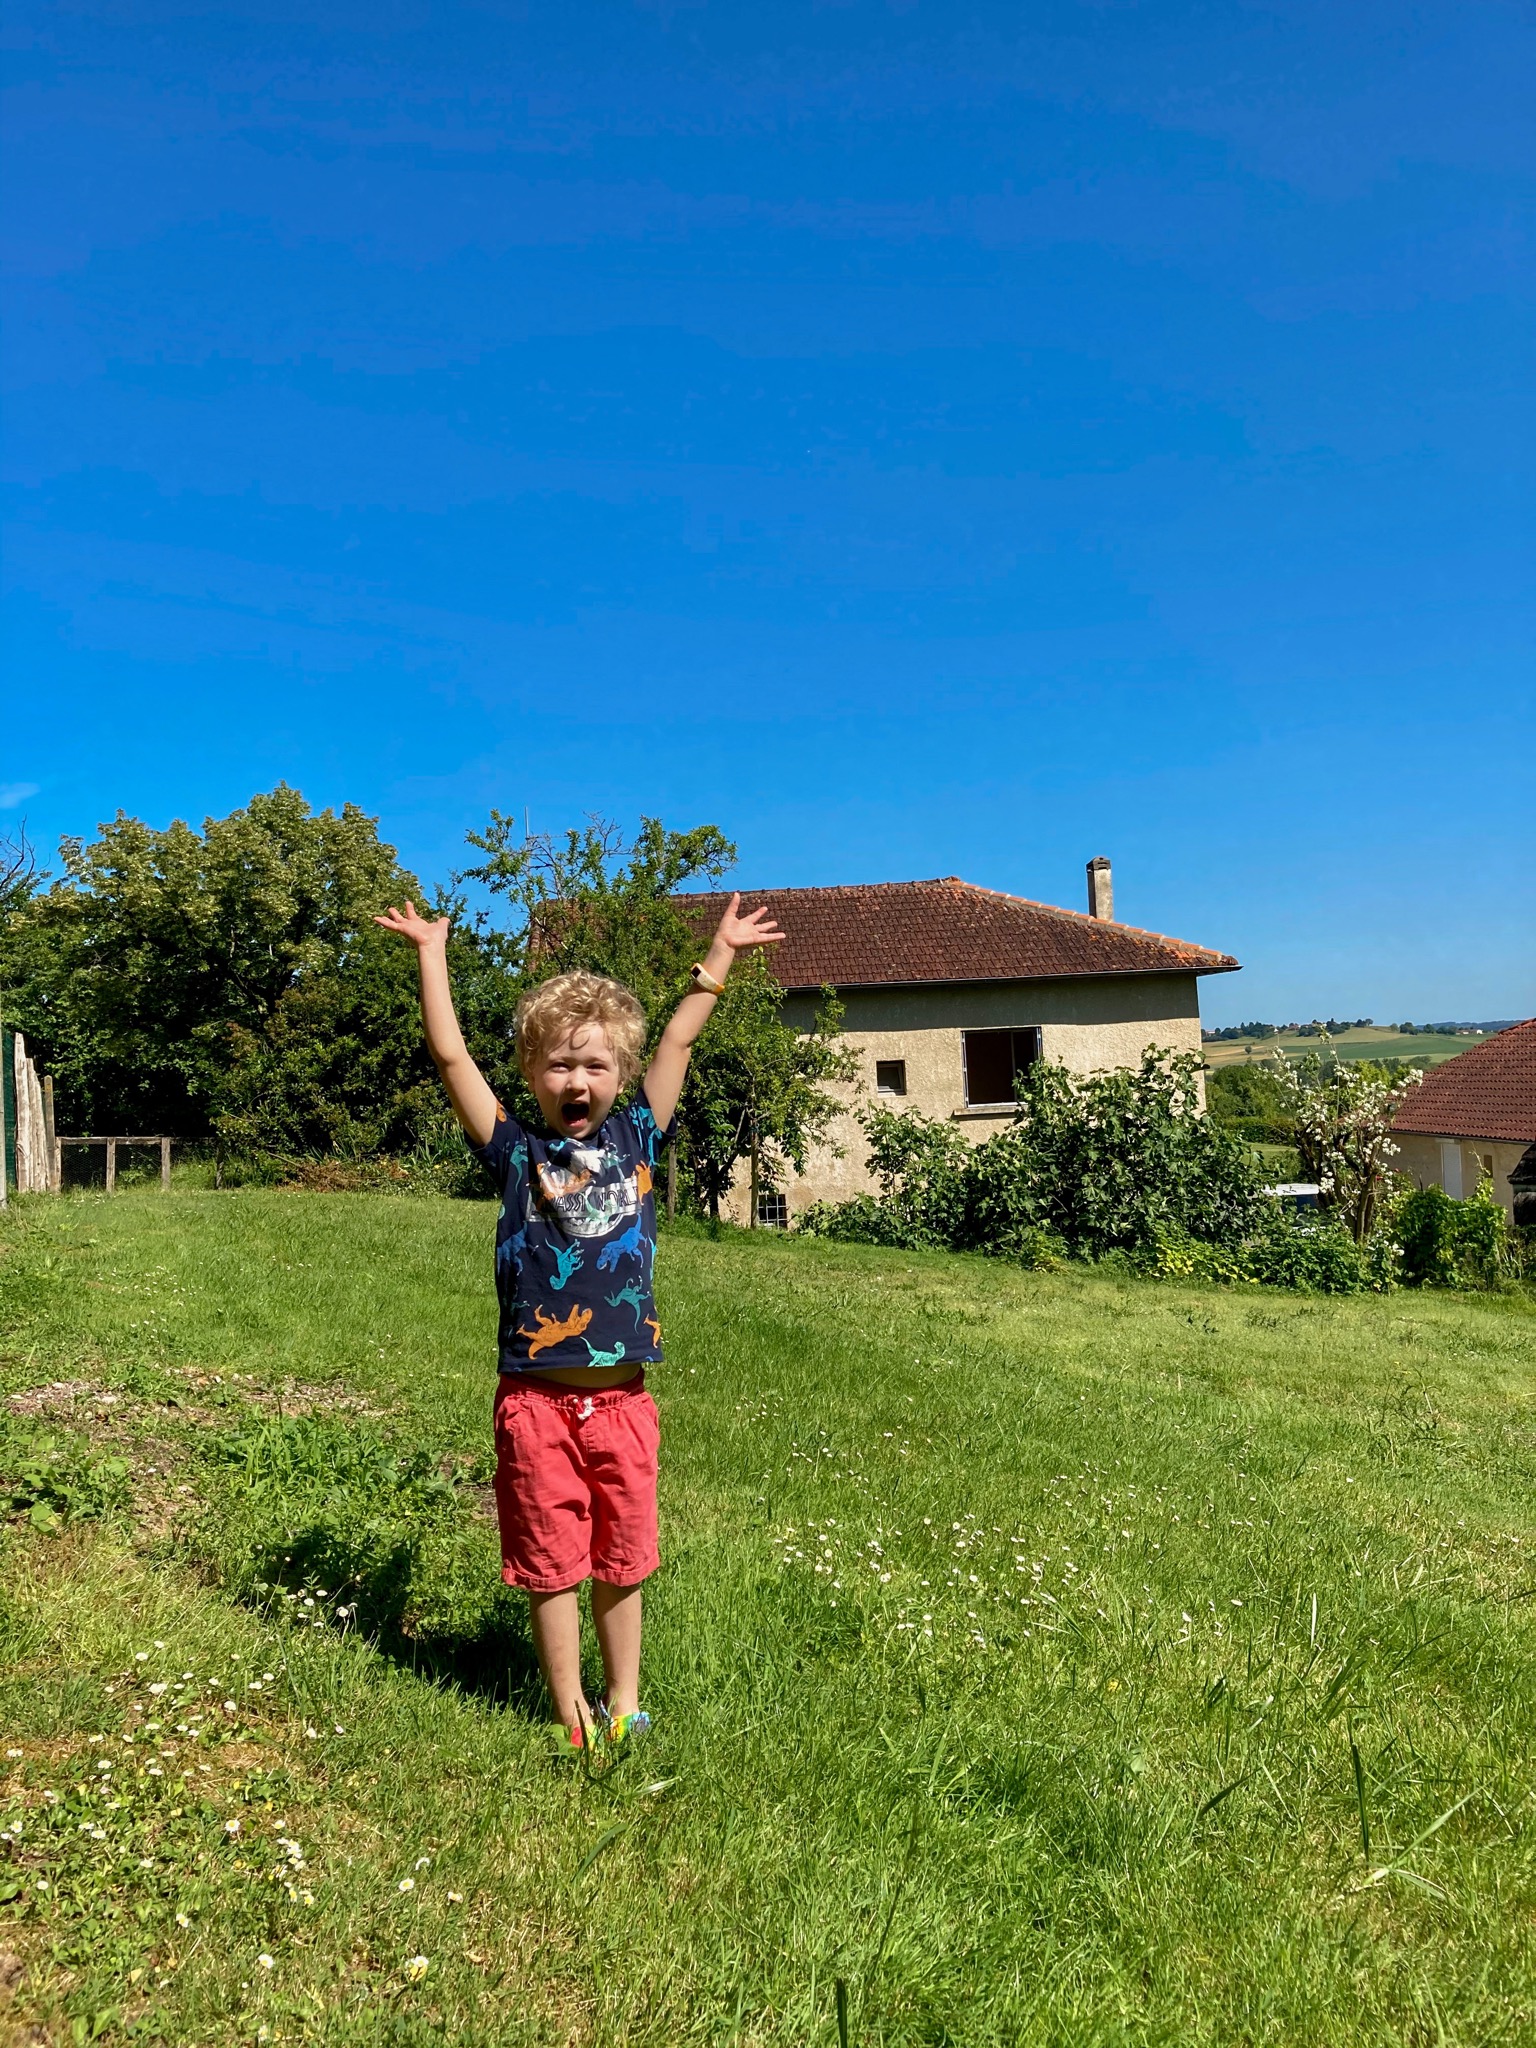 Lucas stood in the garden with his arms up and smiling. The house is in the background